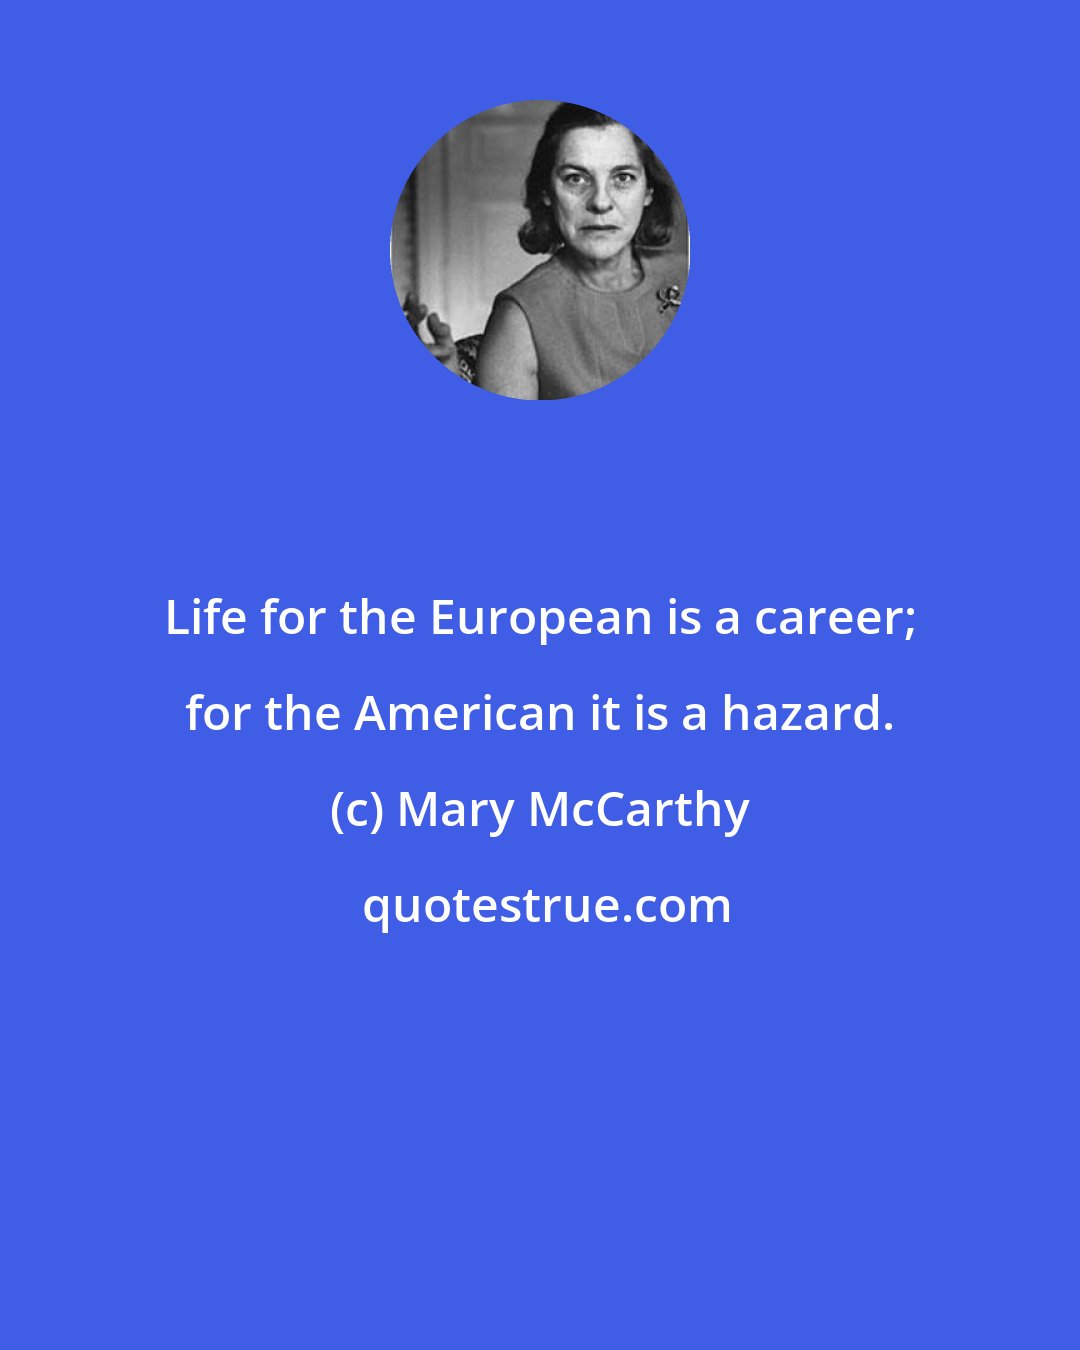 Mary McCarthy: Life for the European is a career; for the American it is a hazard.